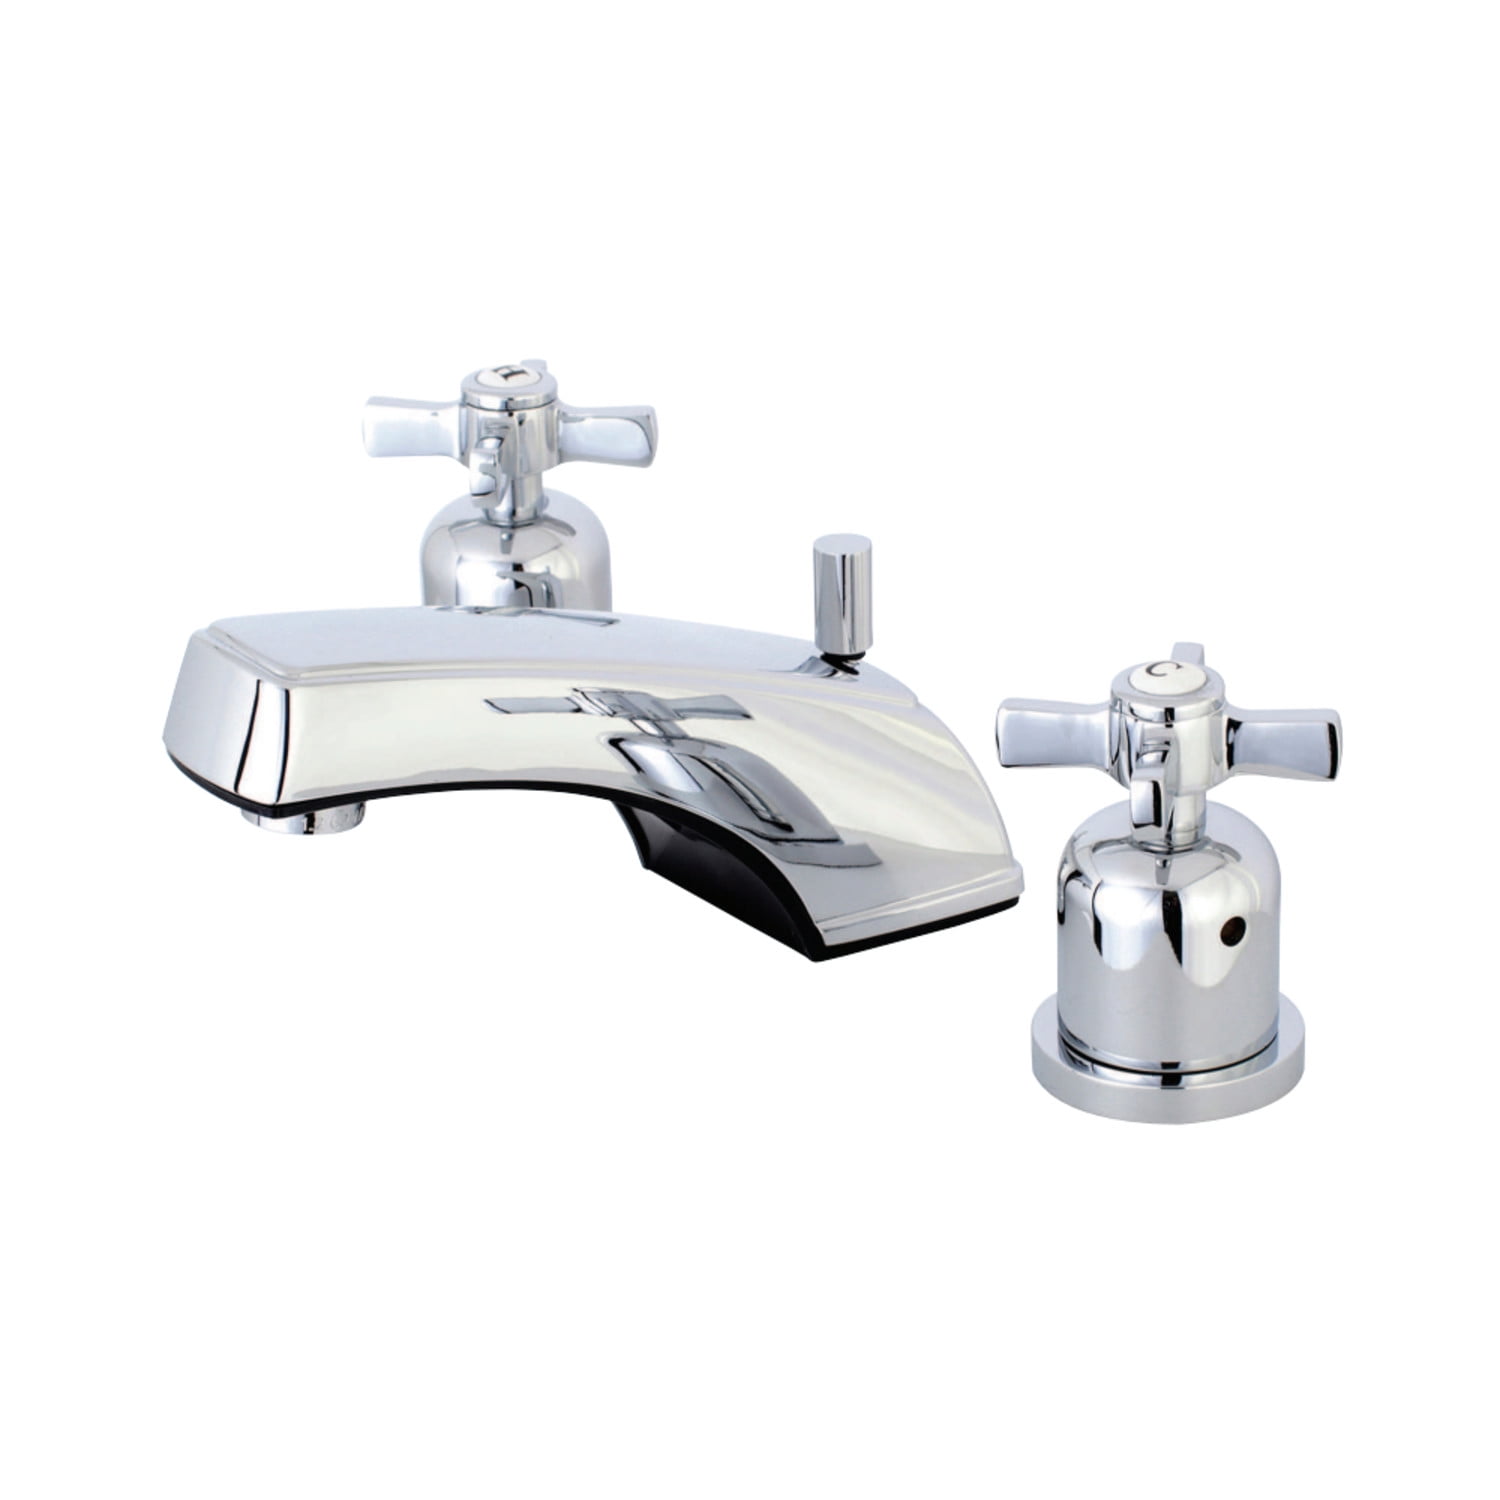 Solid Brass 2 Handle Lavatory Vessel Faucets with Pop Up Drain Assembly and Soap Dispenser APPASO 3-Hole Bathroom Sink Faucet Widespread Brushed Nickel 